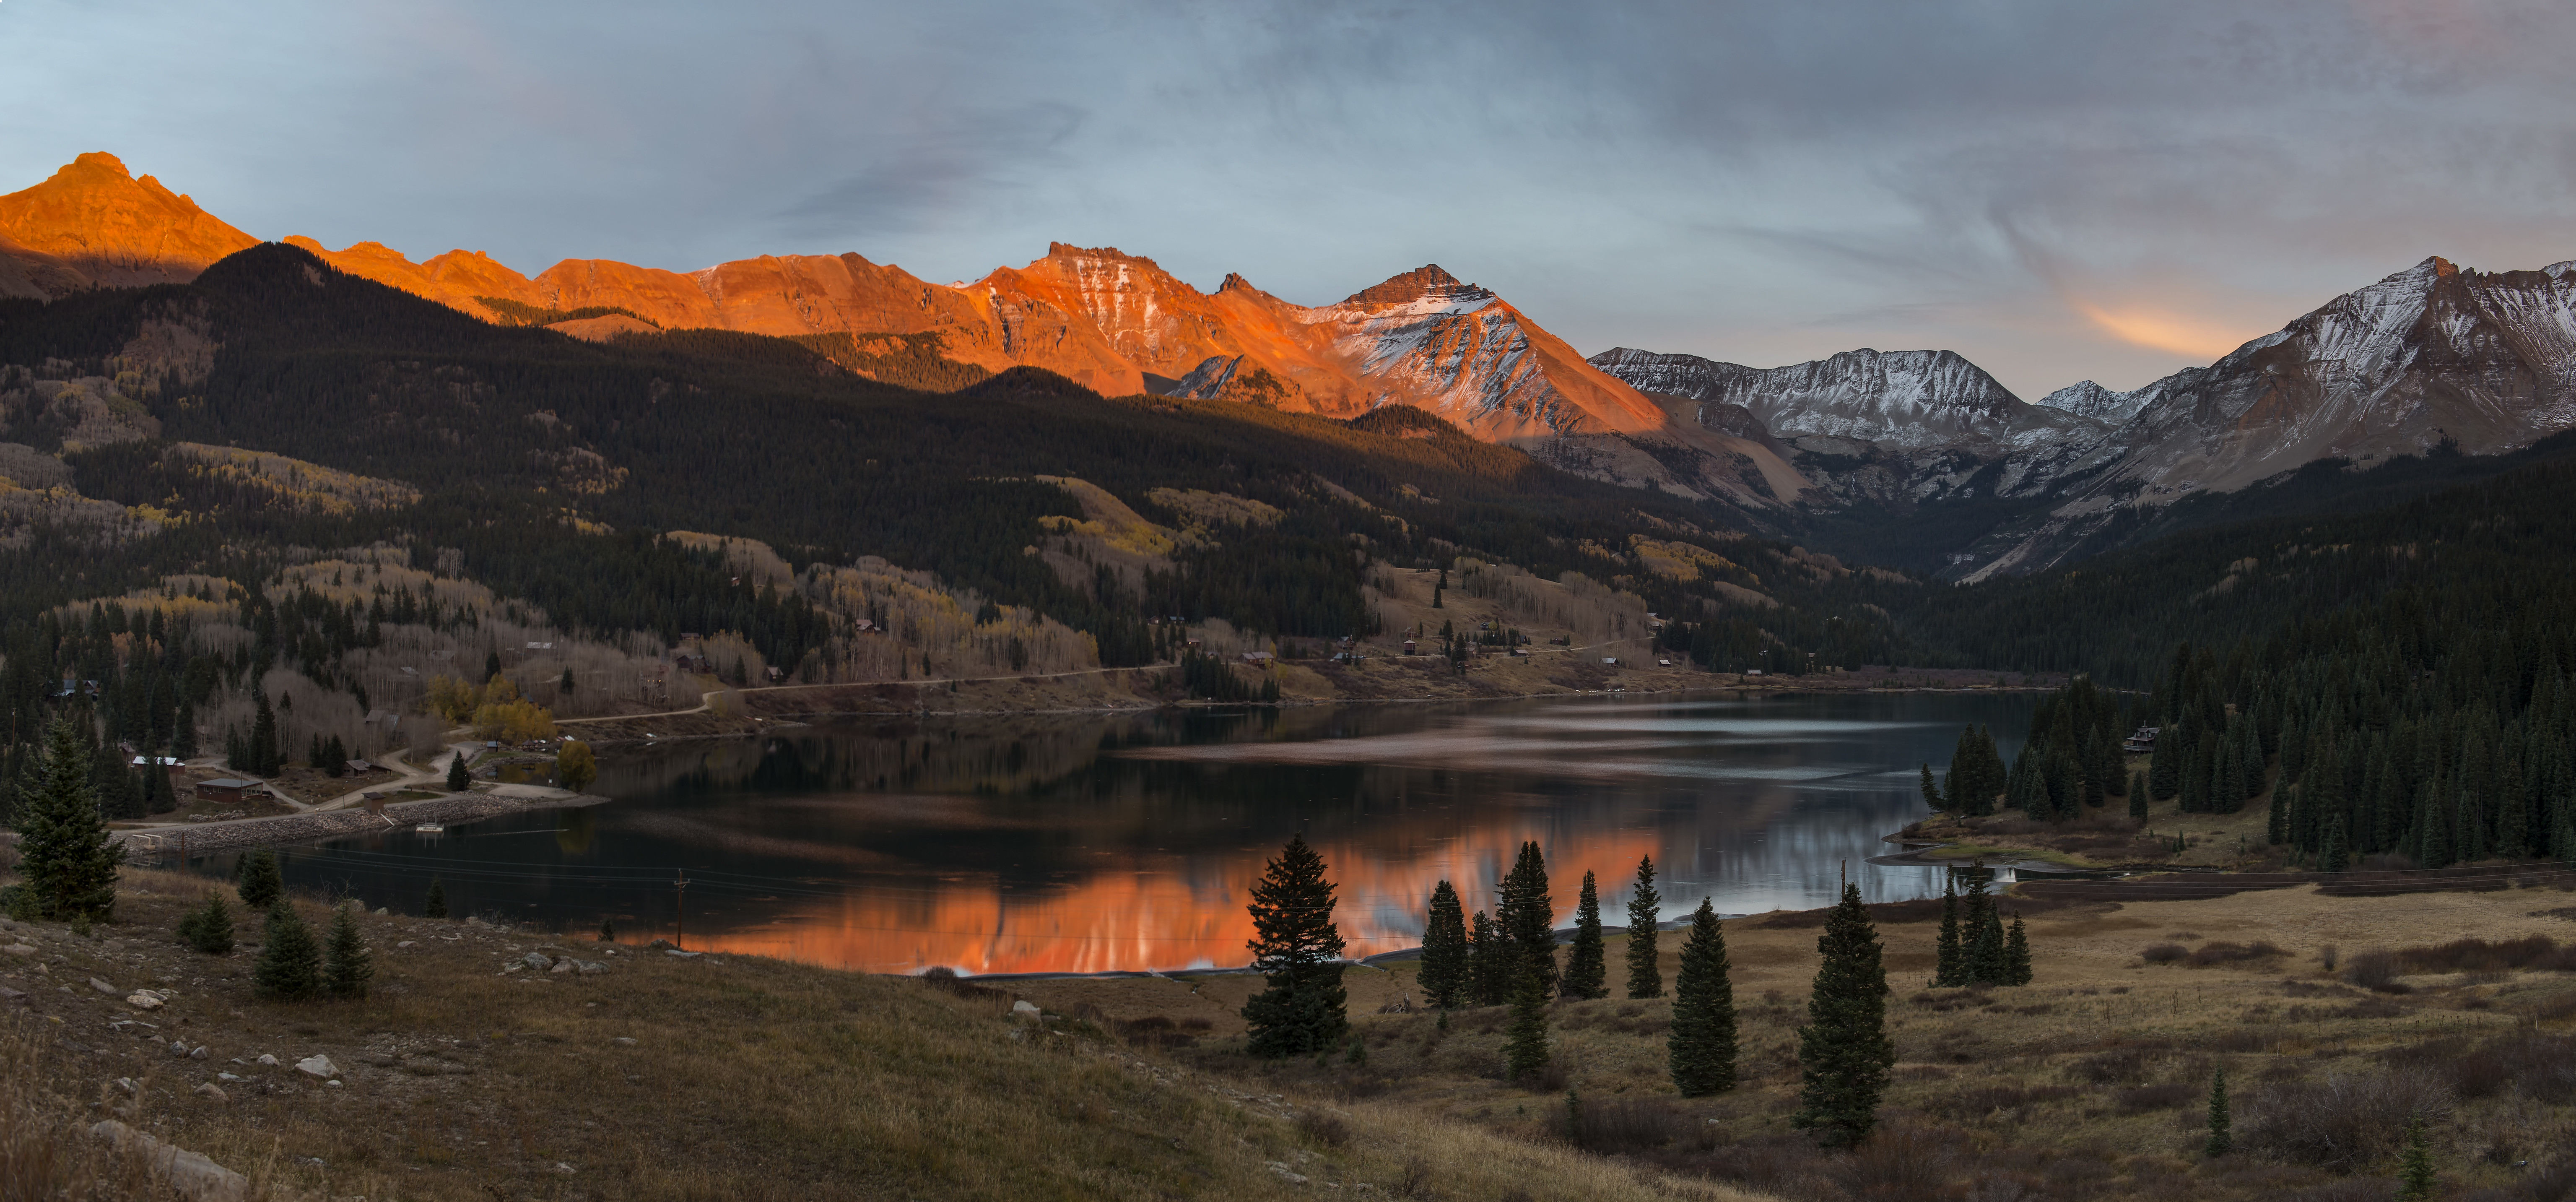 Colorado Mountains Landscape Photography Lake Sunset Water Reflection Sky Trees Snow Nature Clouds 6144x2866